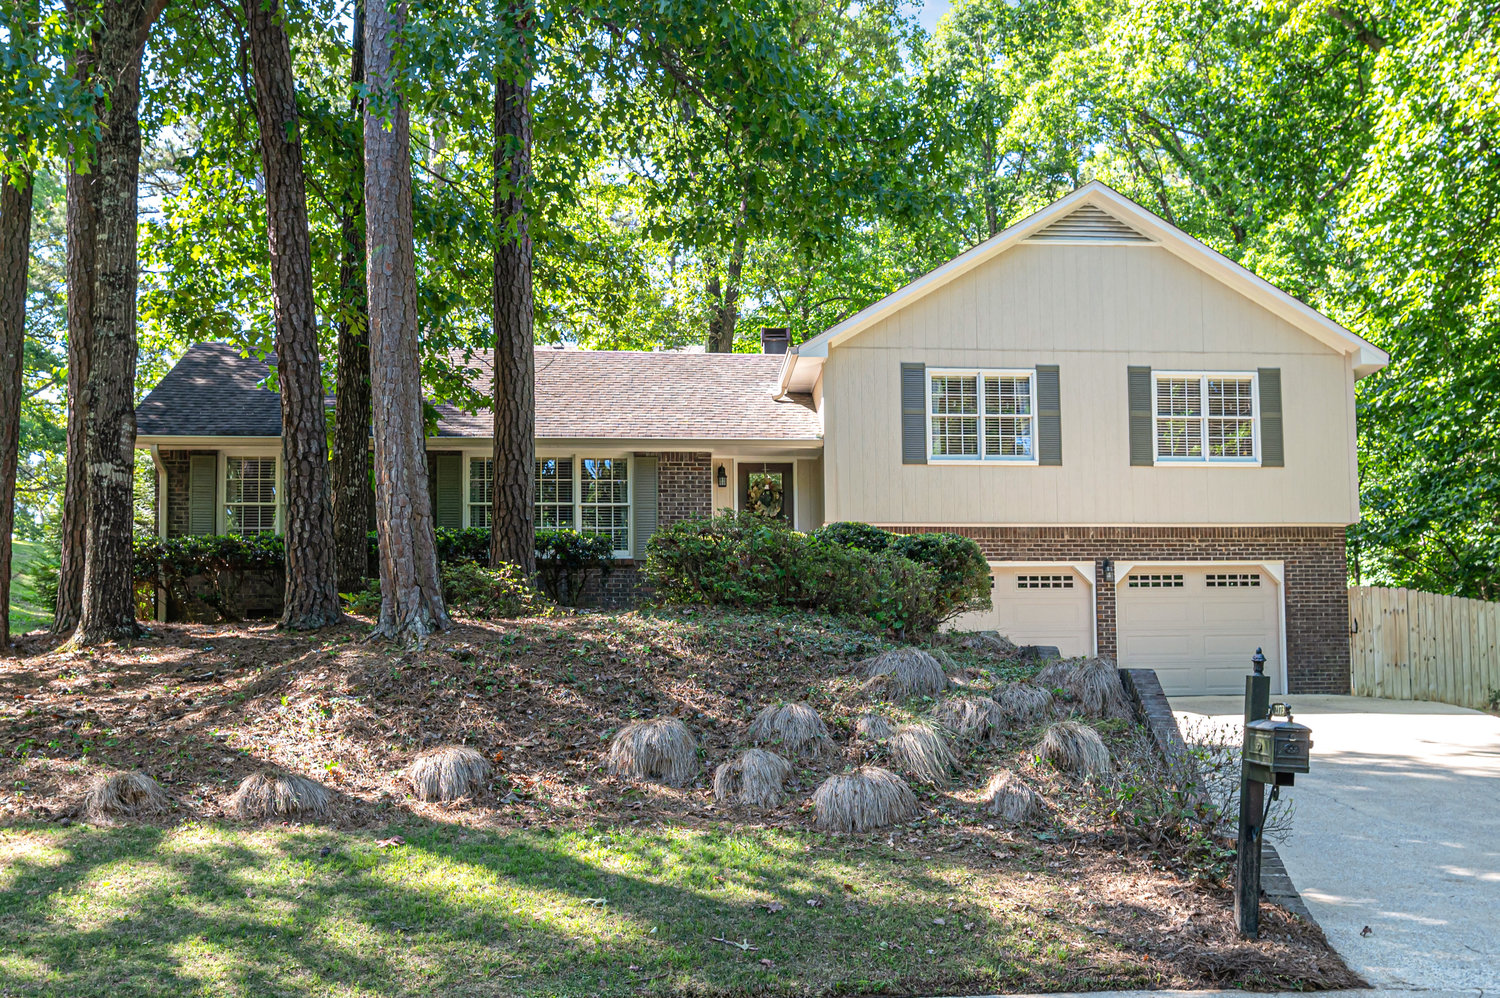 Virtual Tour of Birmingham Metro Real Estate Listing For Sale | 2173 Bailey Brook Drive, Hoover, AL 35244